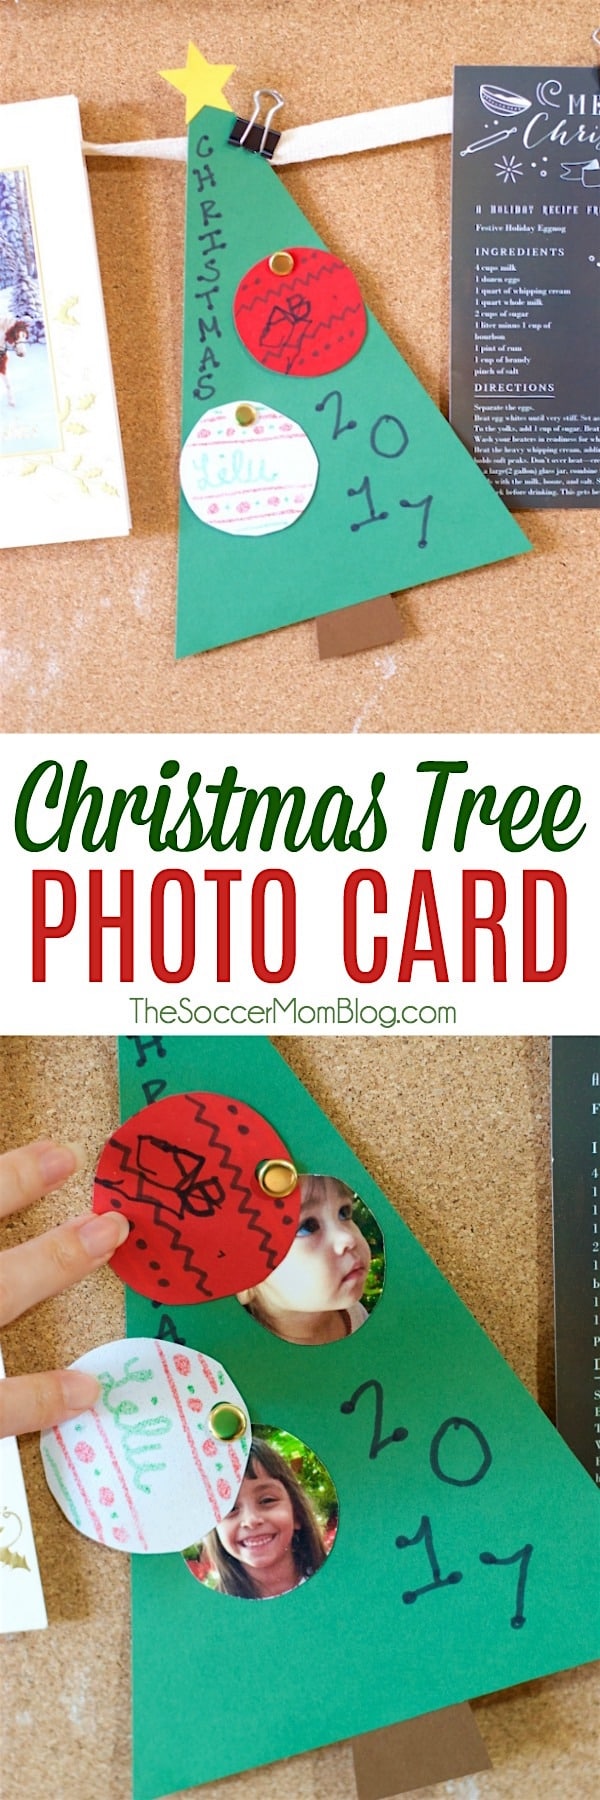 construction paper Christmas tree card